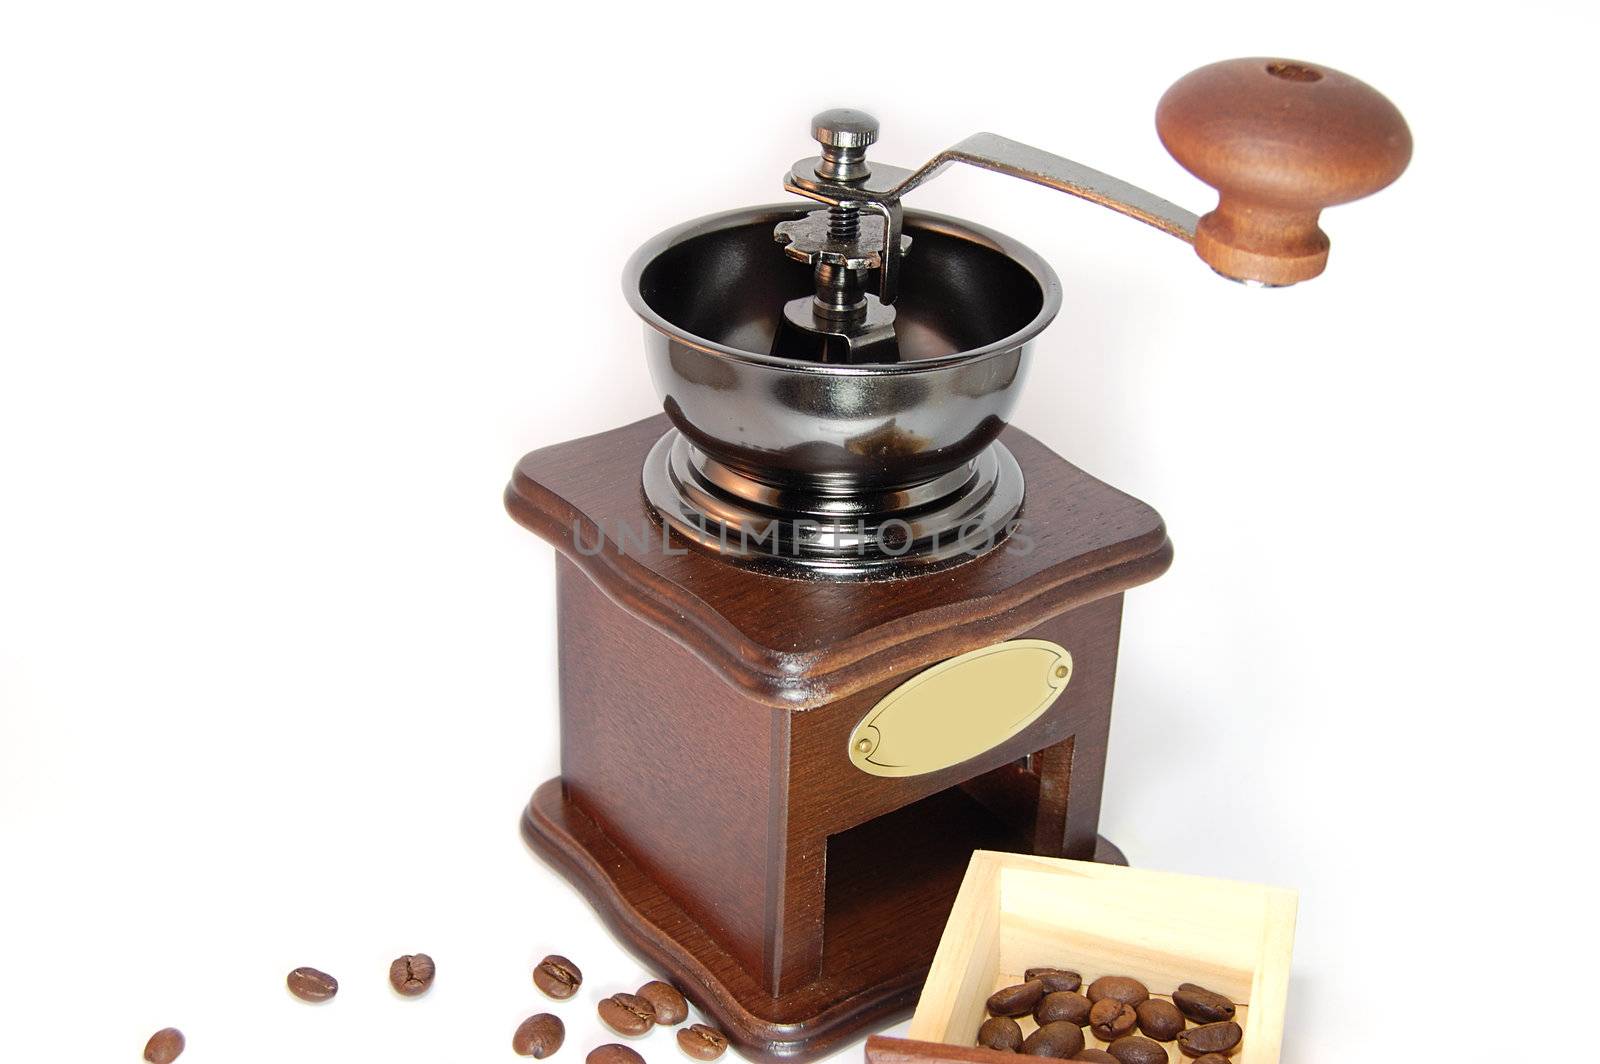 Coffee grinder with beans isolated on white